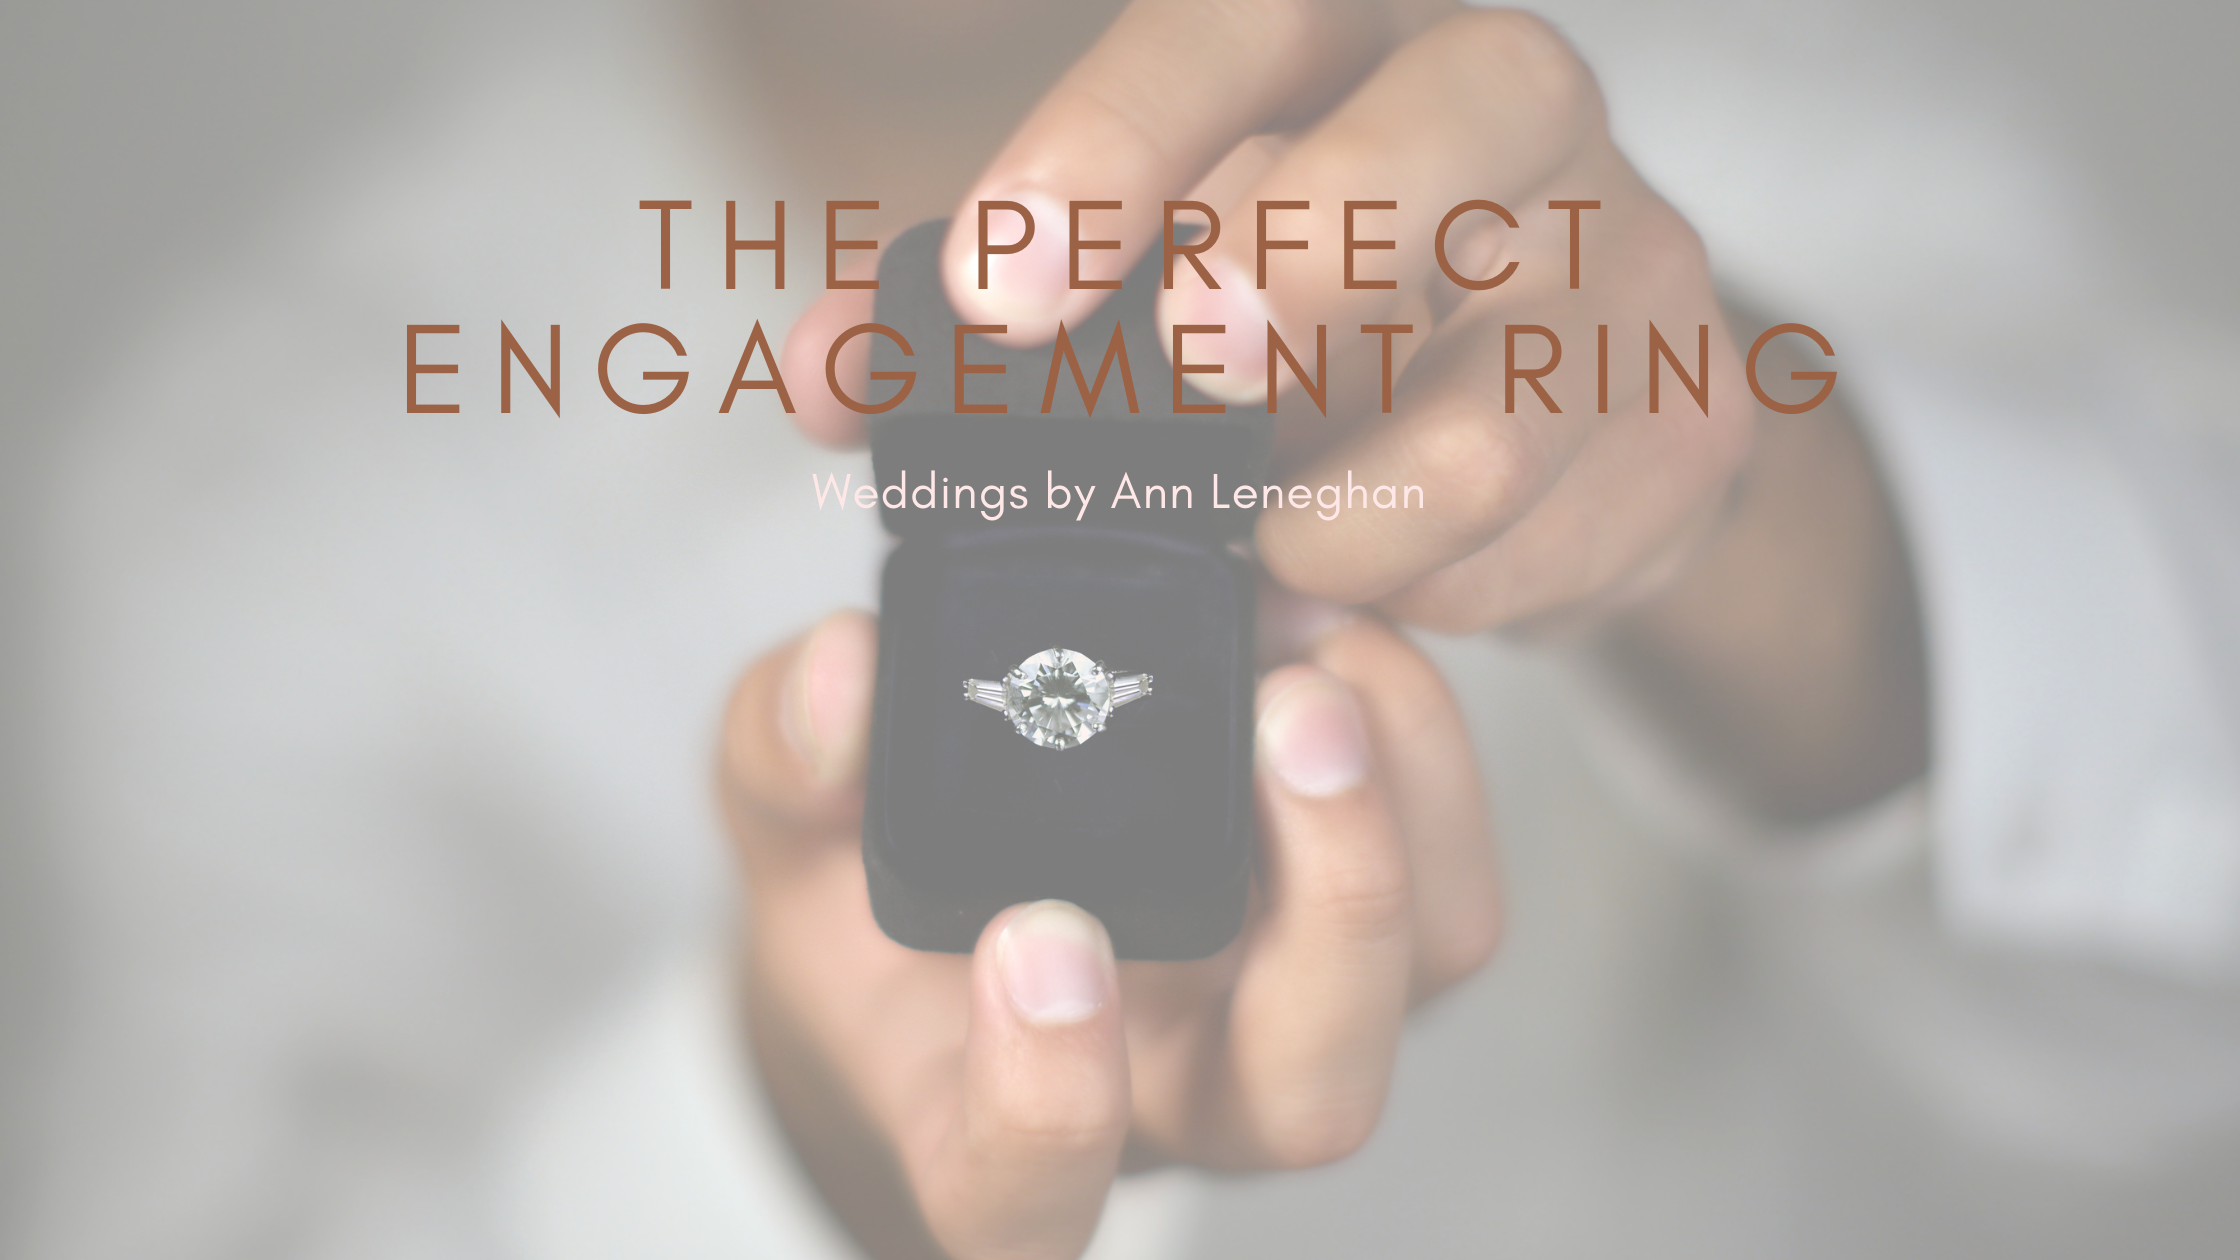 Choosing the engagement ring!